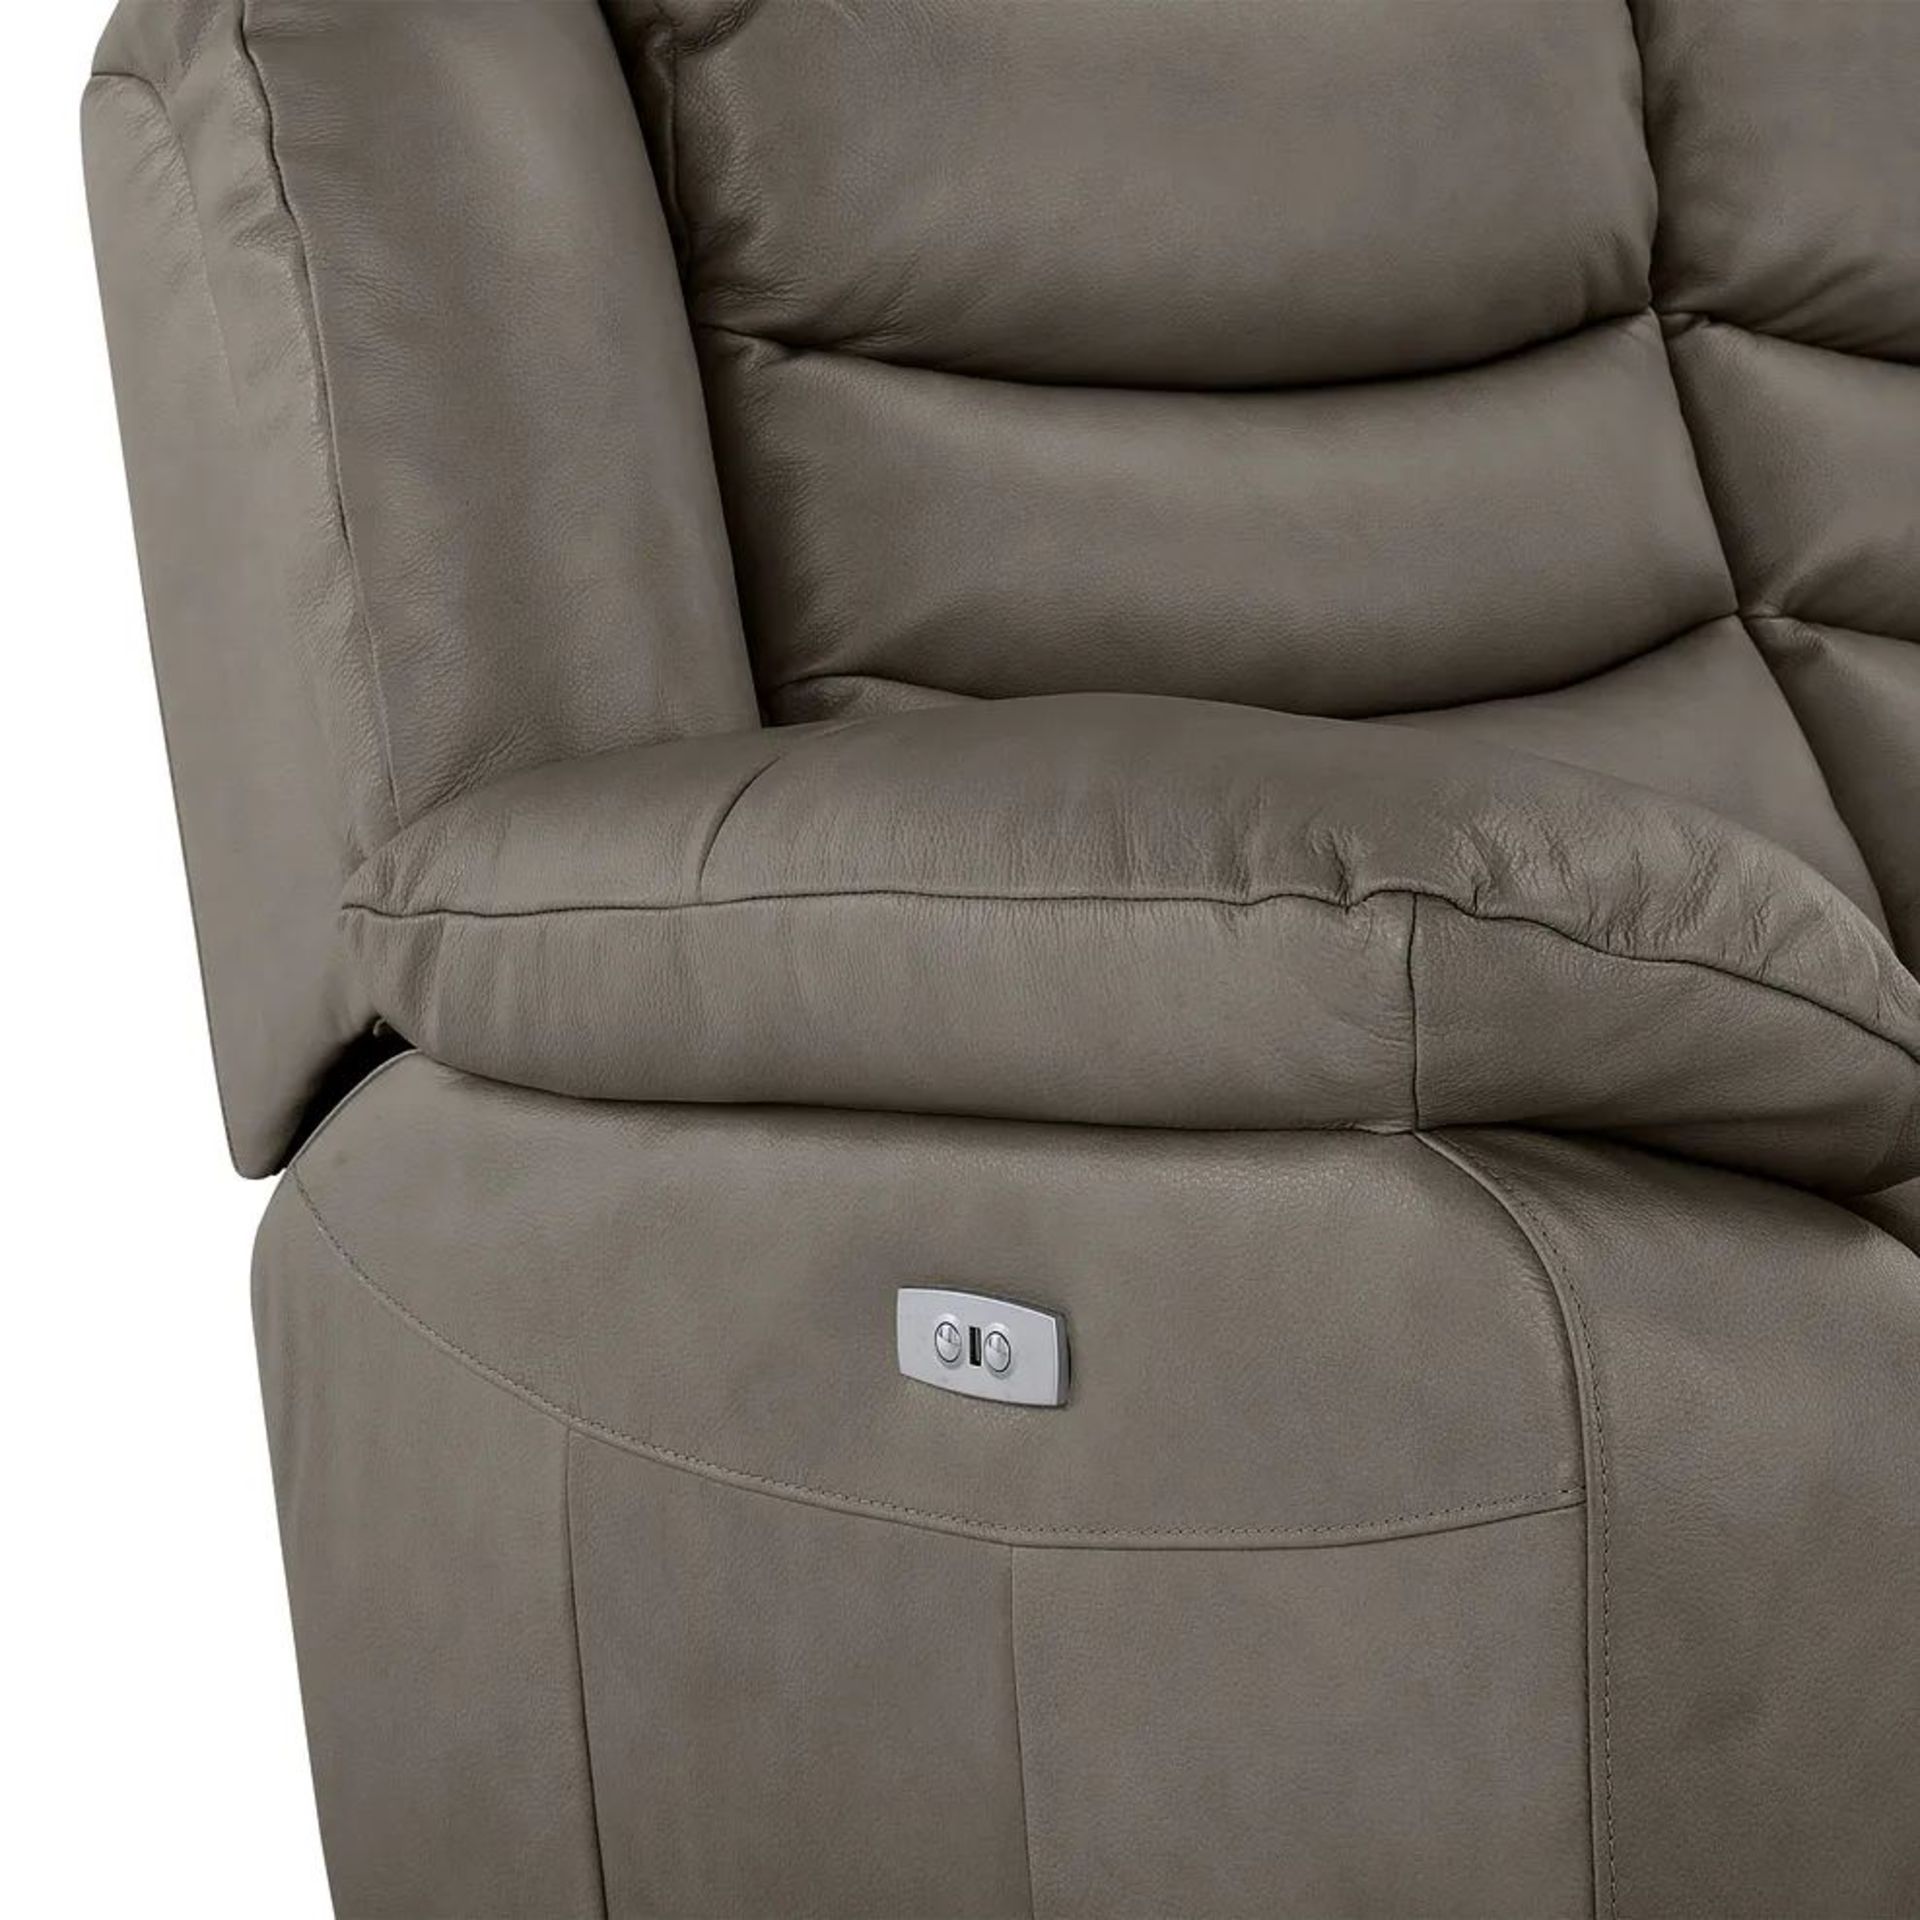 BRAND NEW MARLOW 3 Seater Electric Recliner Sofa - DARK GREY LEATHER. RRP £1849. Our Marlow - Bild 11 aus 11